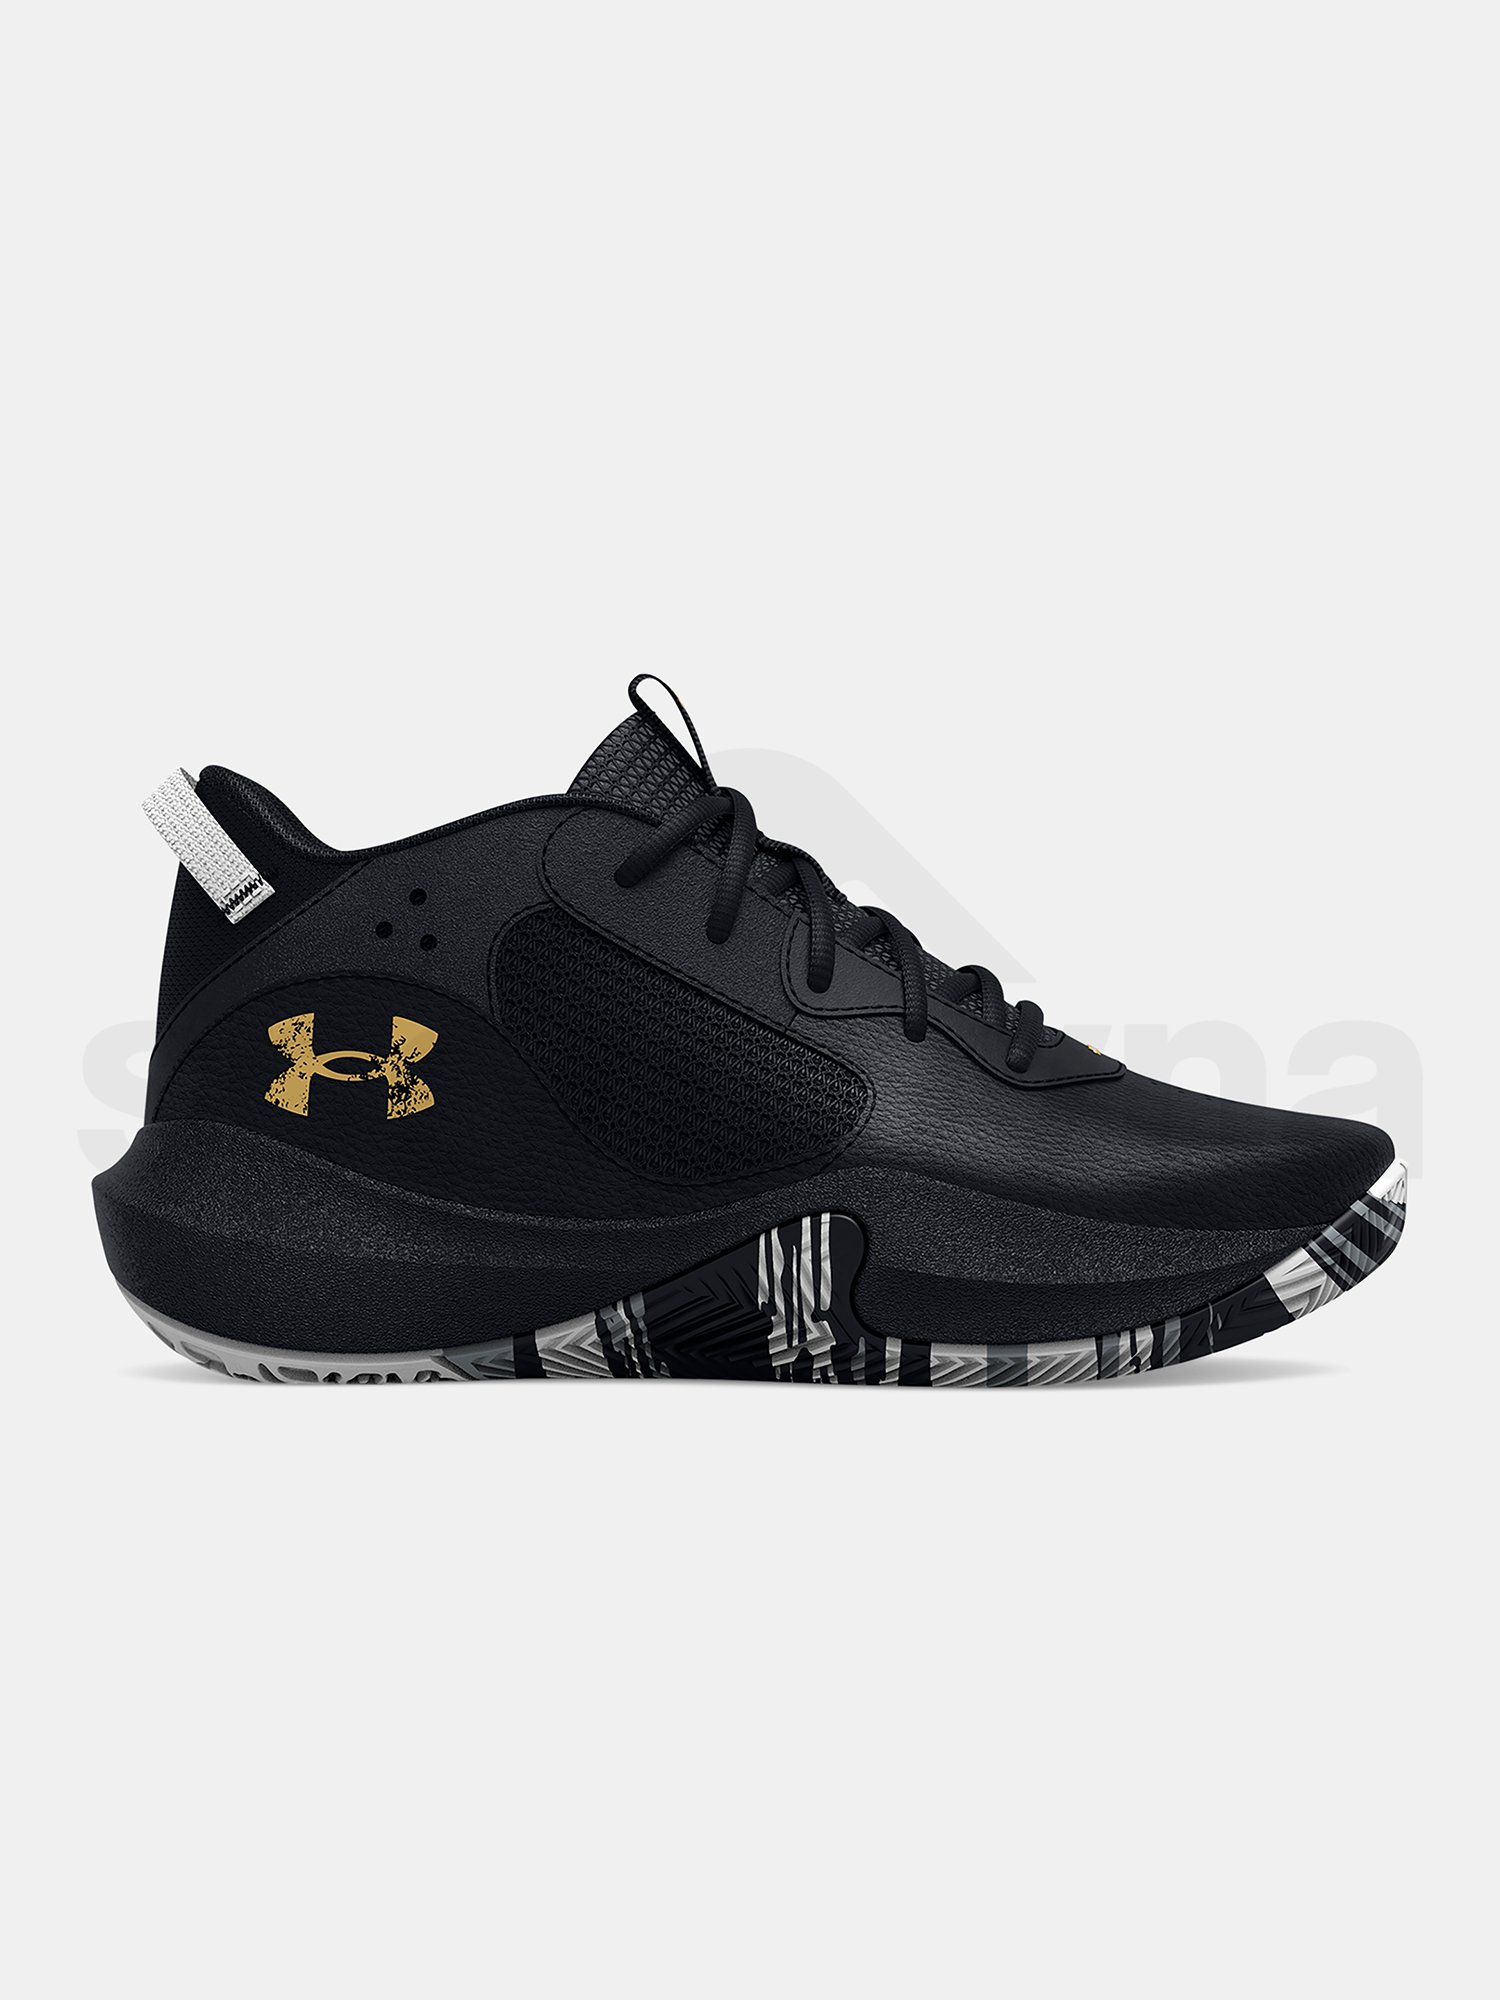 Boty Under Armour UA PS Lockdown 6-BLK